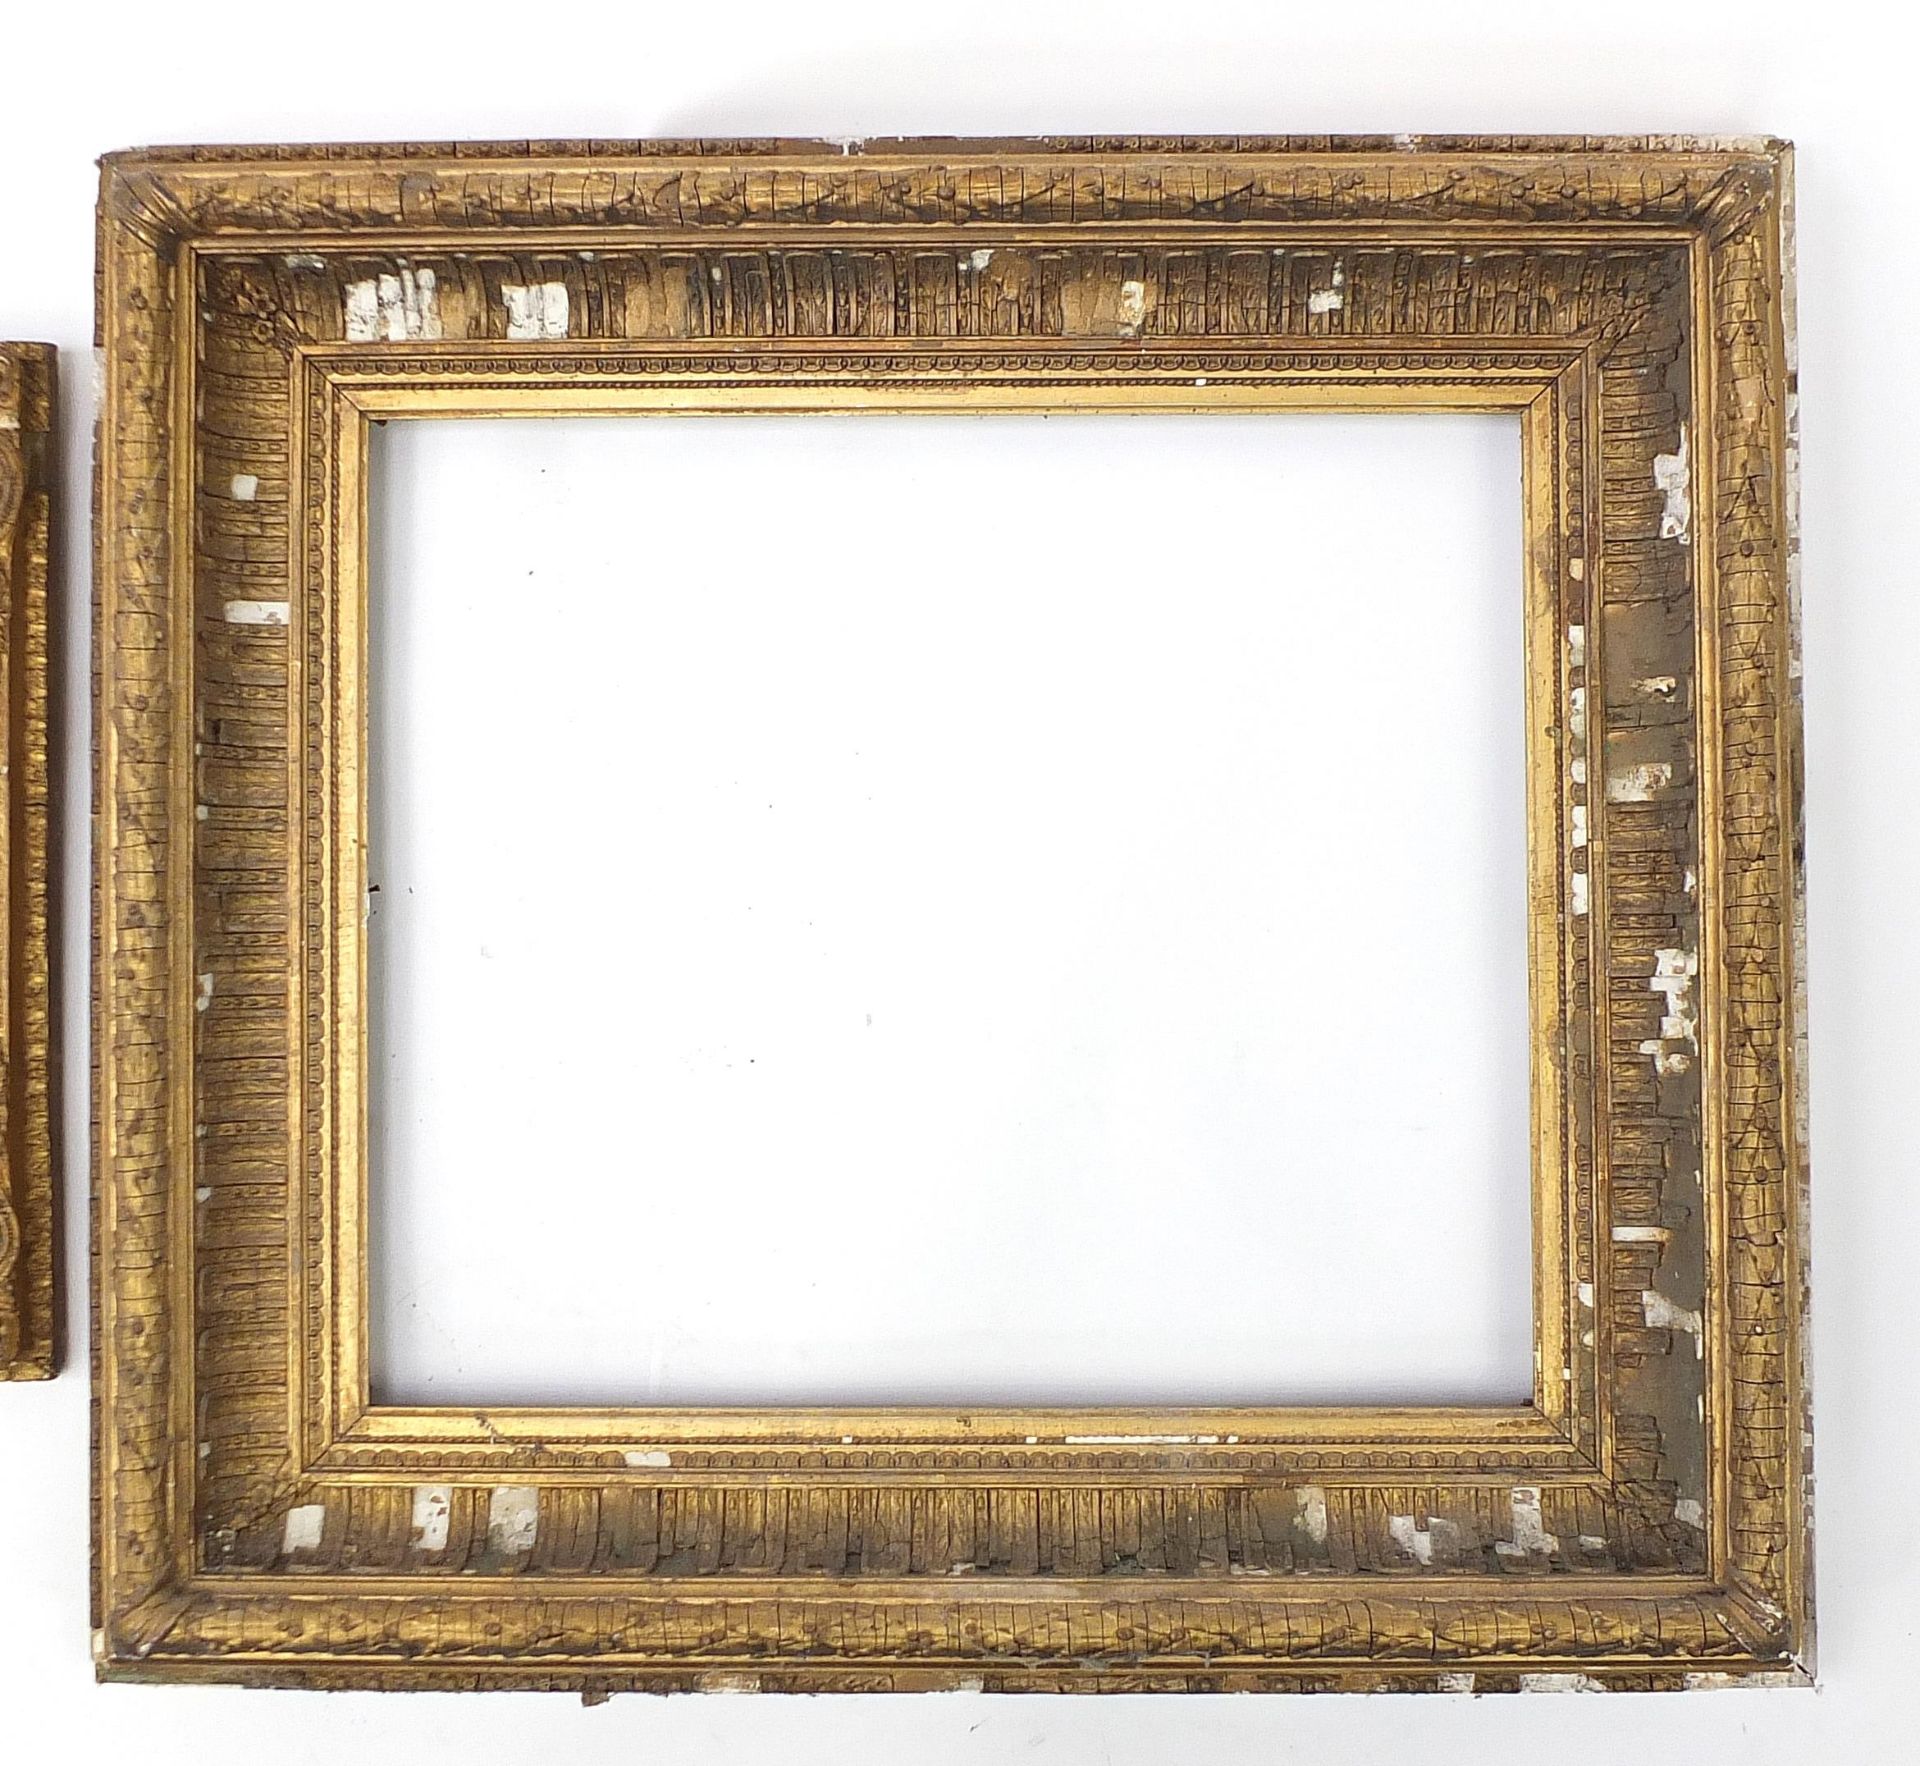 Two 19th century ornate gilt frames, the aperture sizes 56cm x 48cm and 43cm x 31.5cm - Image 3 of 4